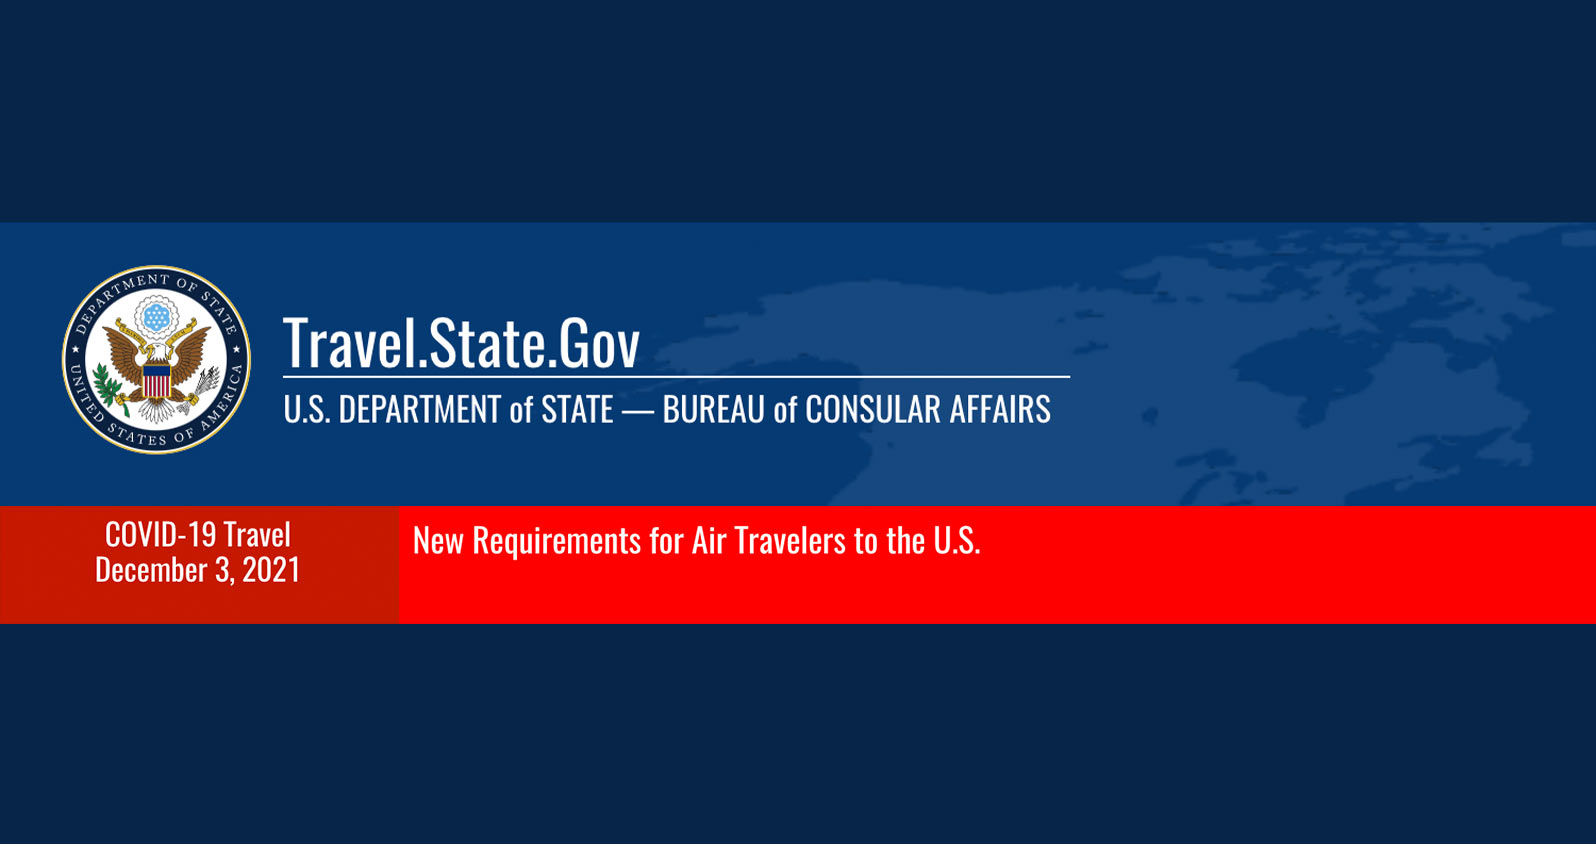 travel-state-gov-new-requirements-for-air-travelers-to-the-u-s-trip